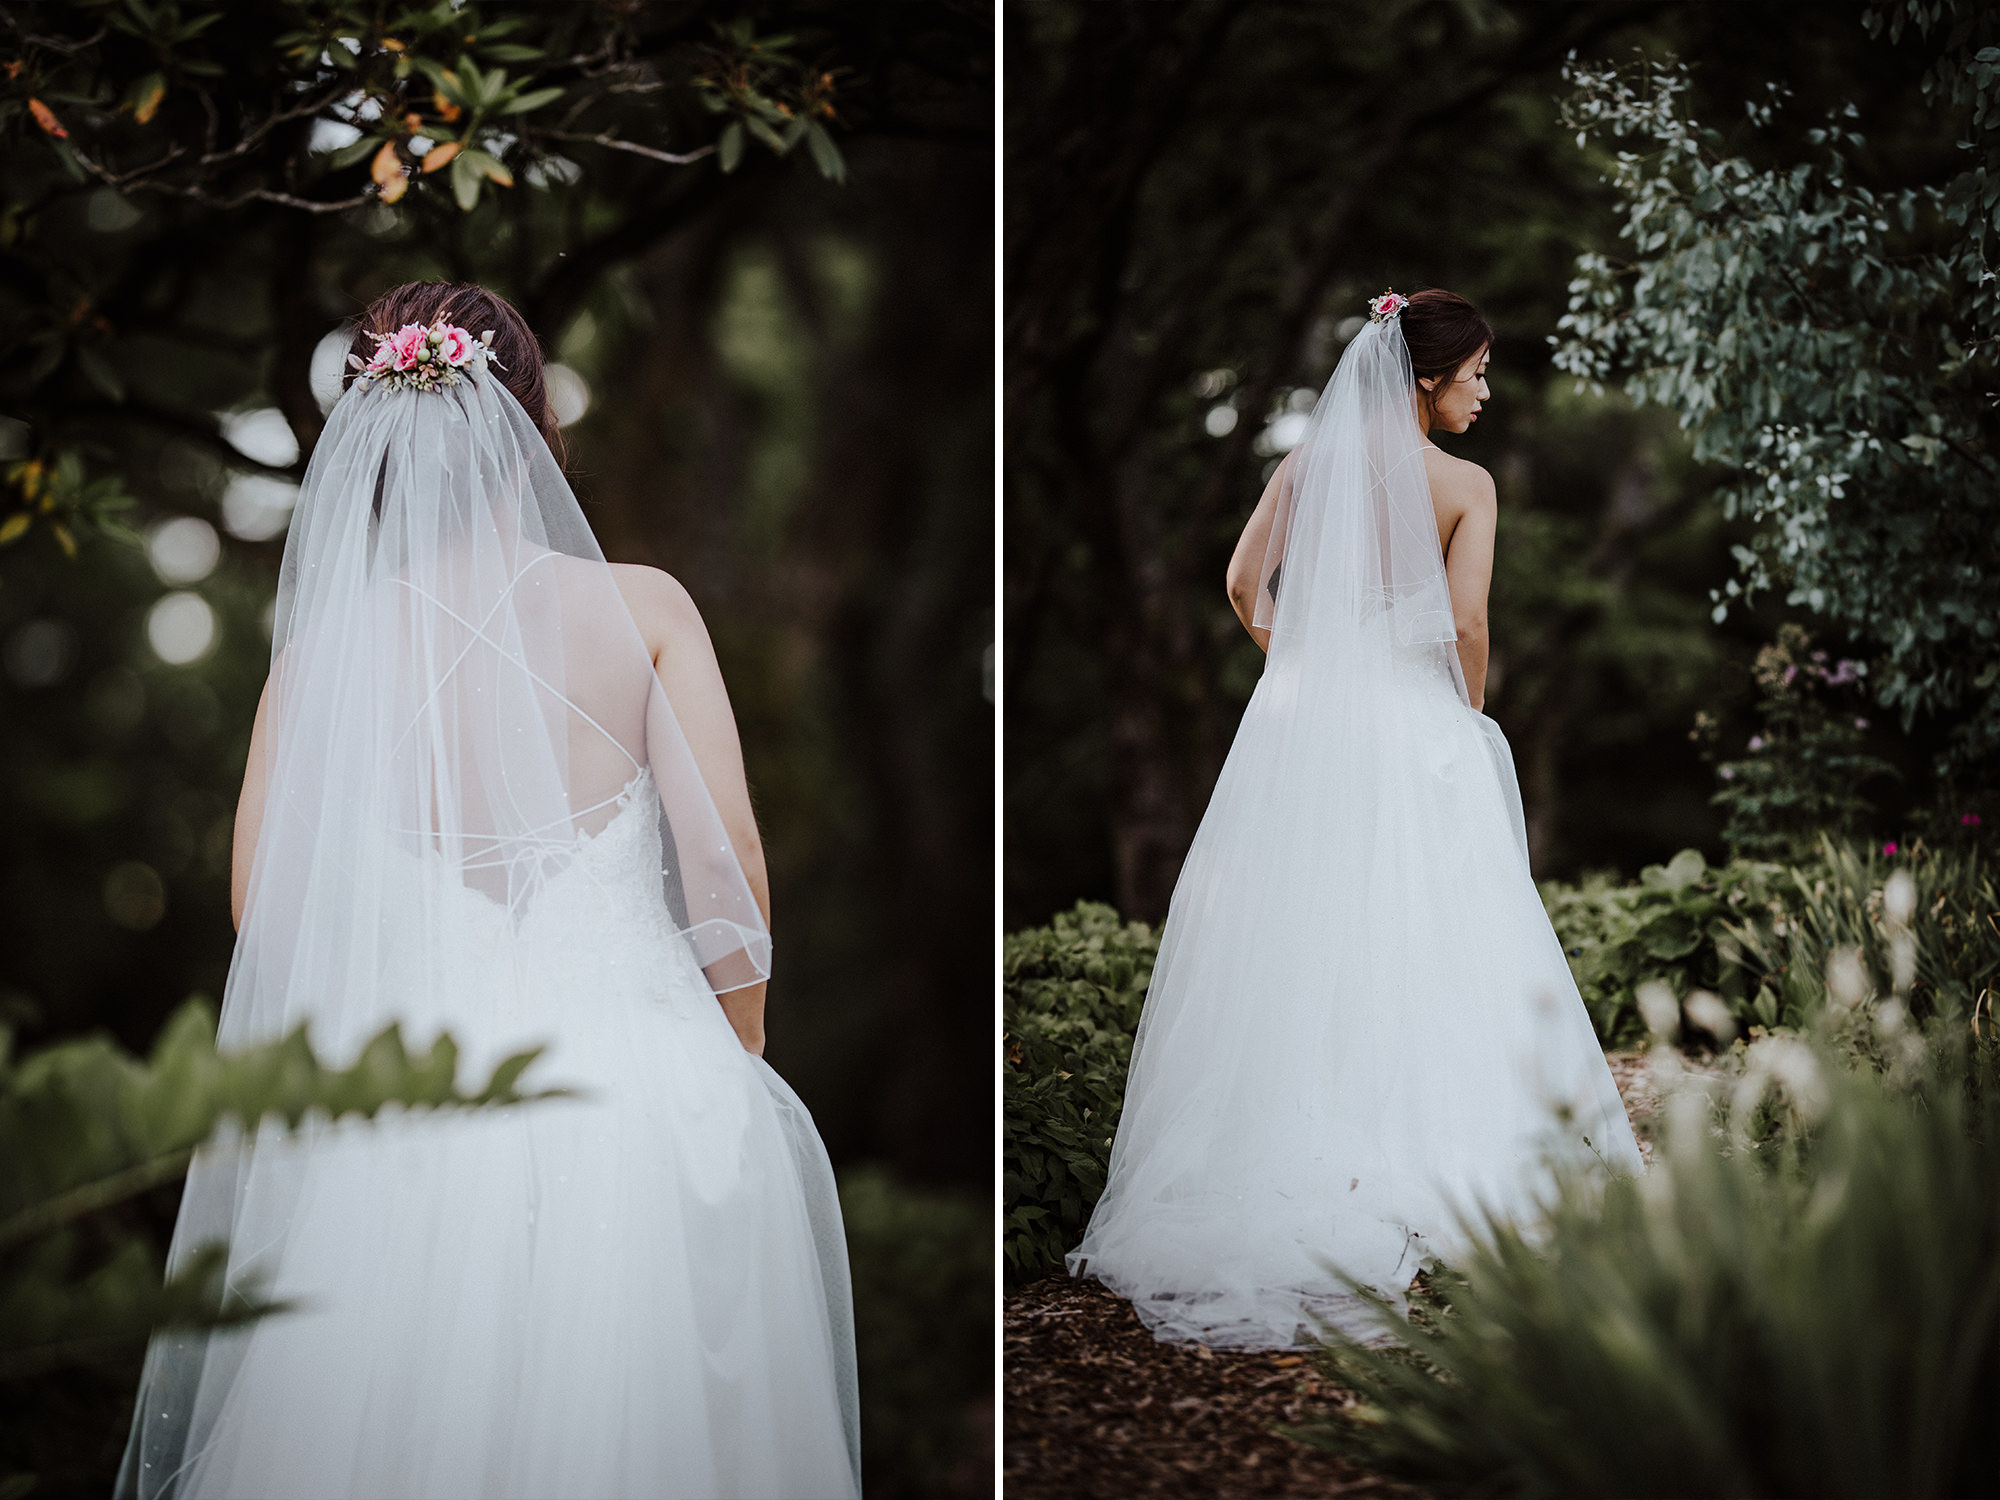 View of bride's veil and flower hair piece as she walks away